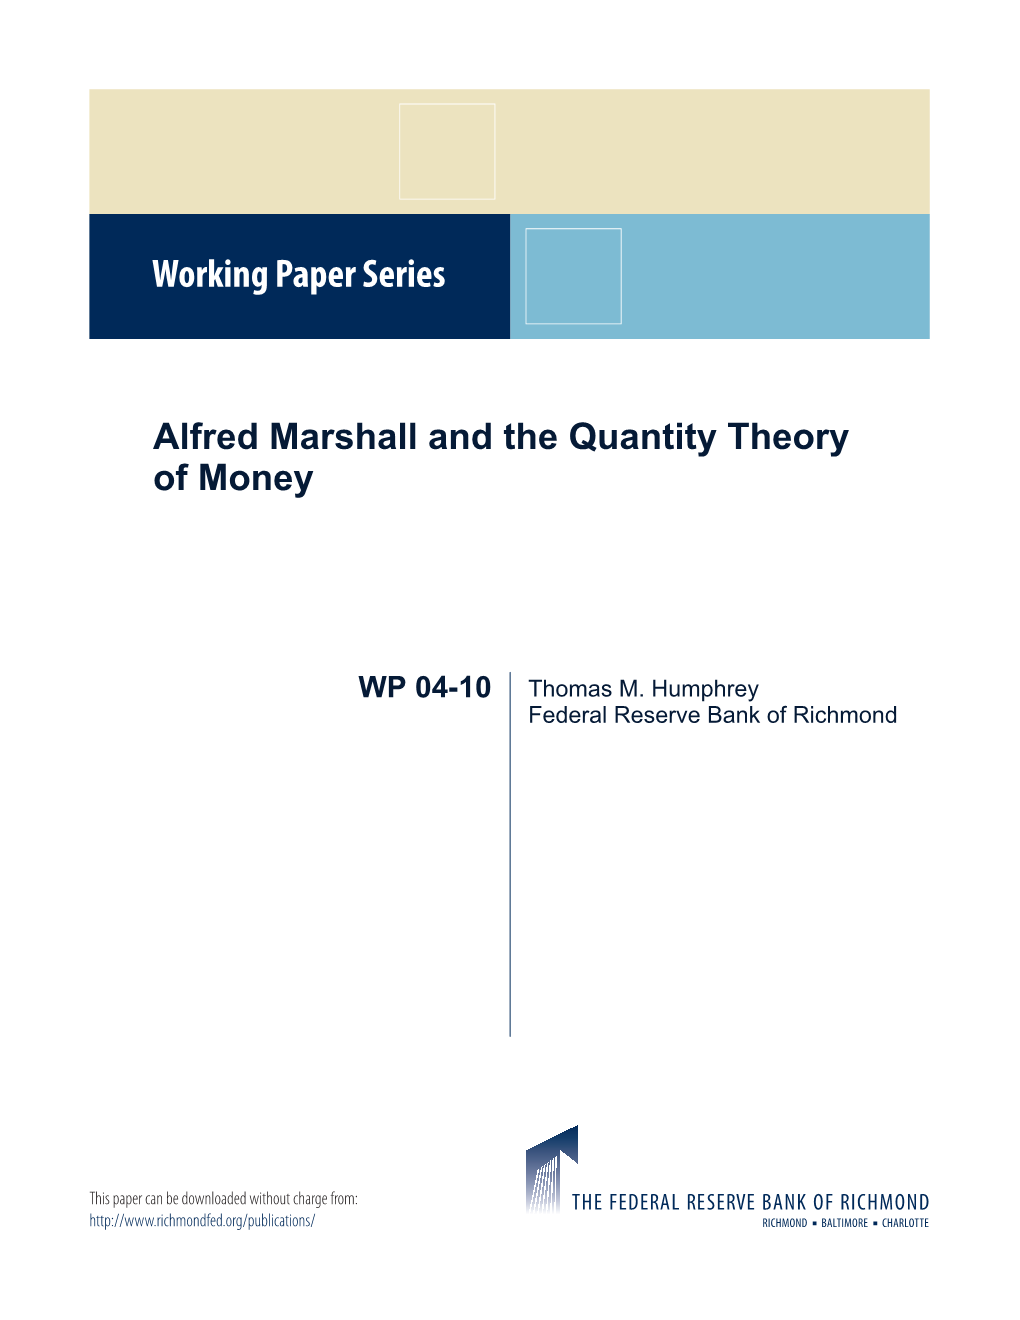 Alfred Marshall and the Quantity Theory of Money1